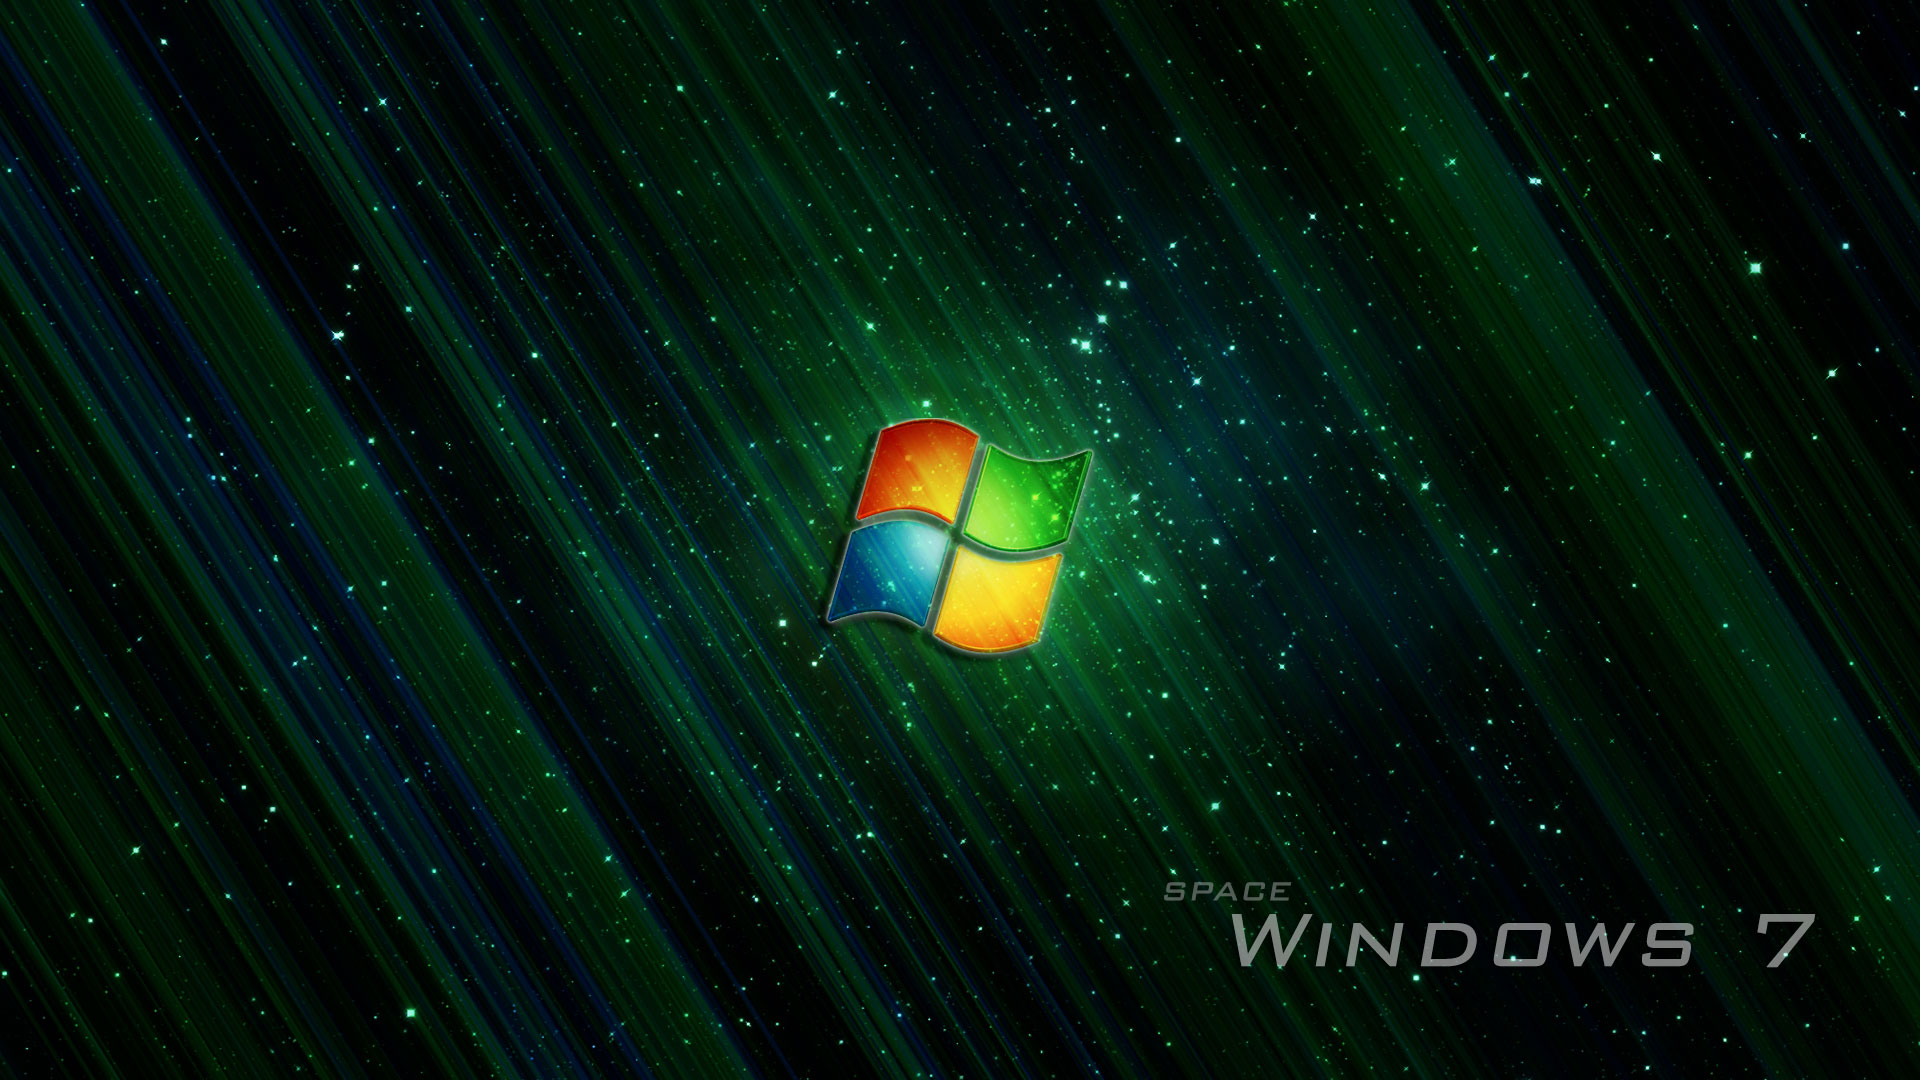 Windows Wallpaper Pro submited images